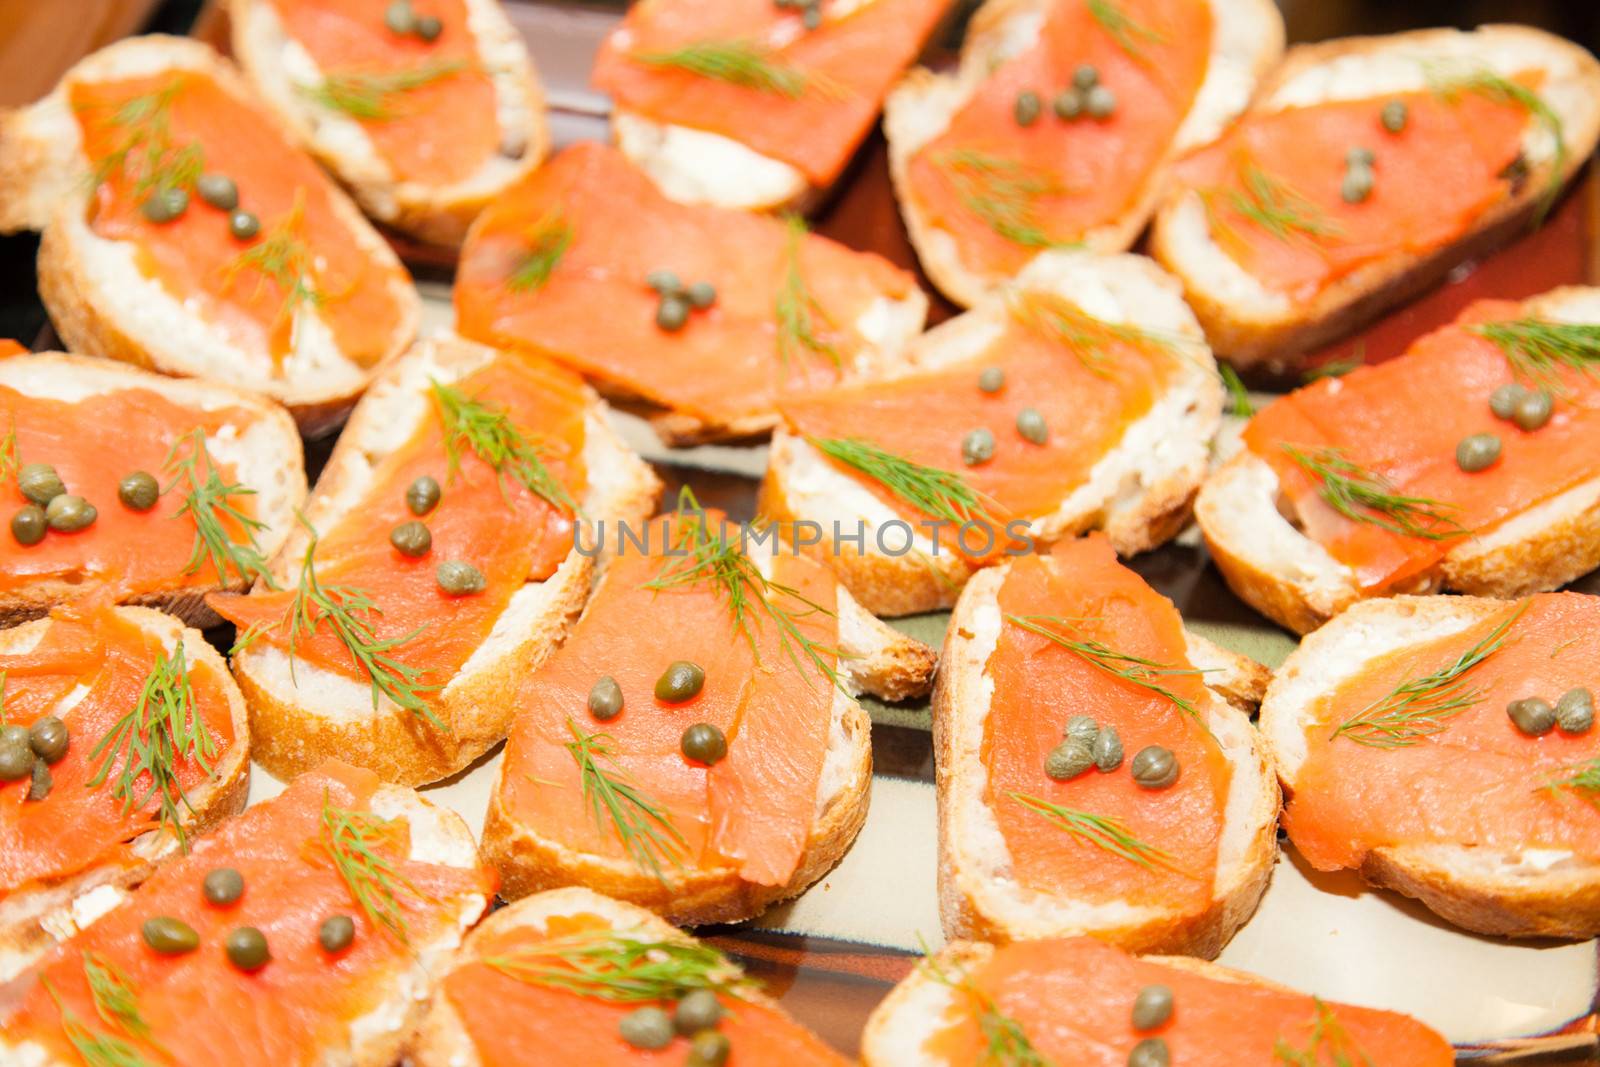 The crunchy Crostini combine with the smoky salmon, salty capers and fresh dill to make these beautiful appetizers a party favorite.